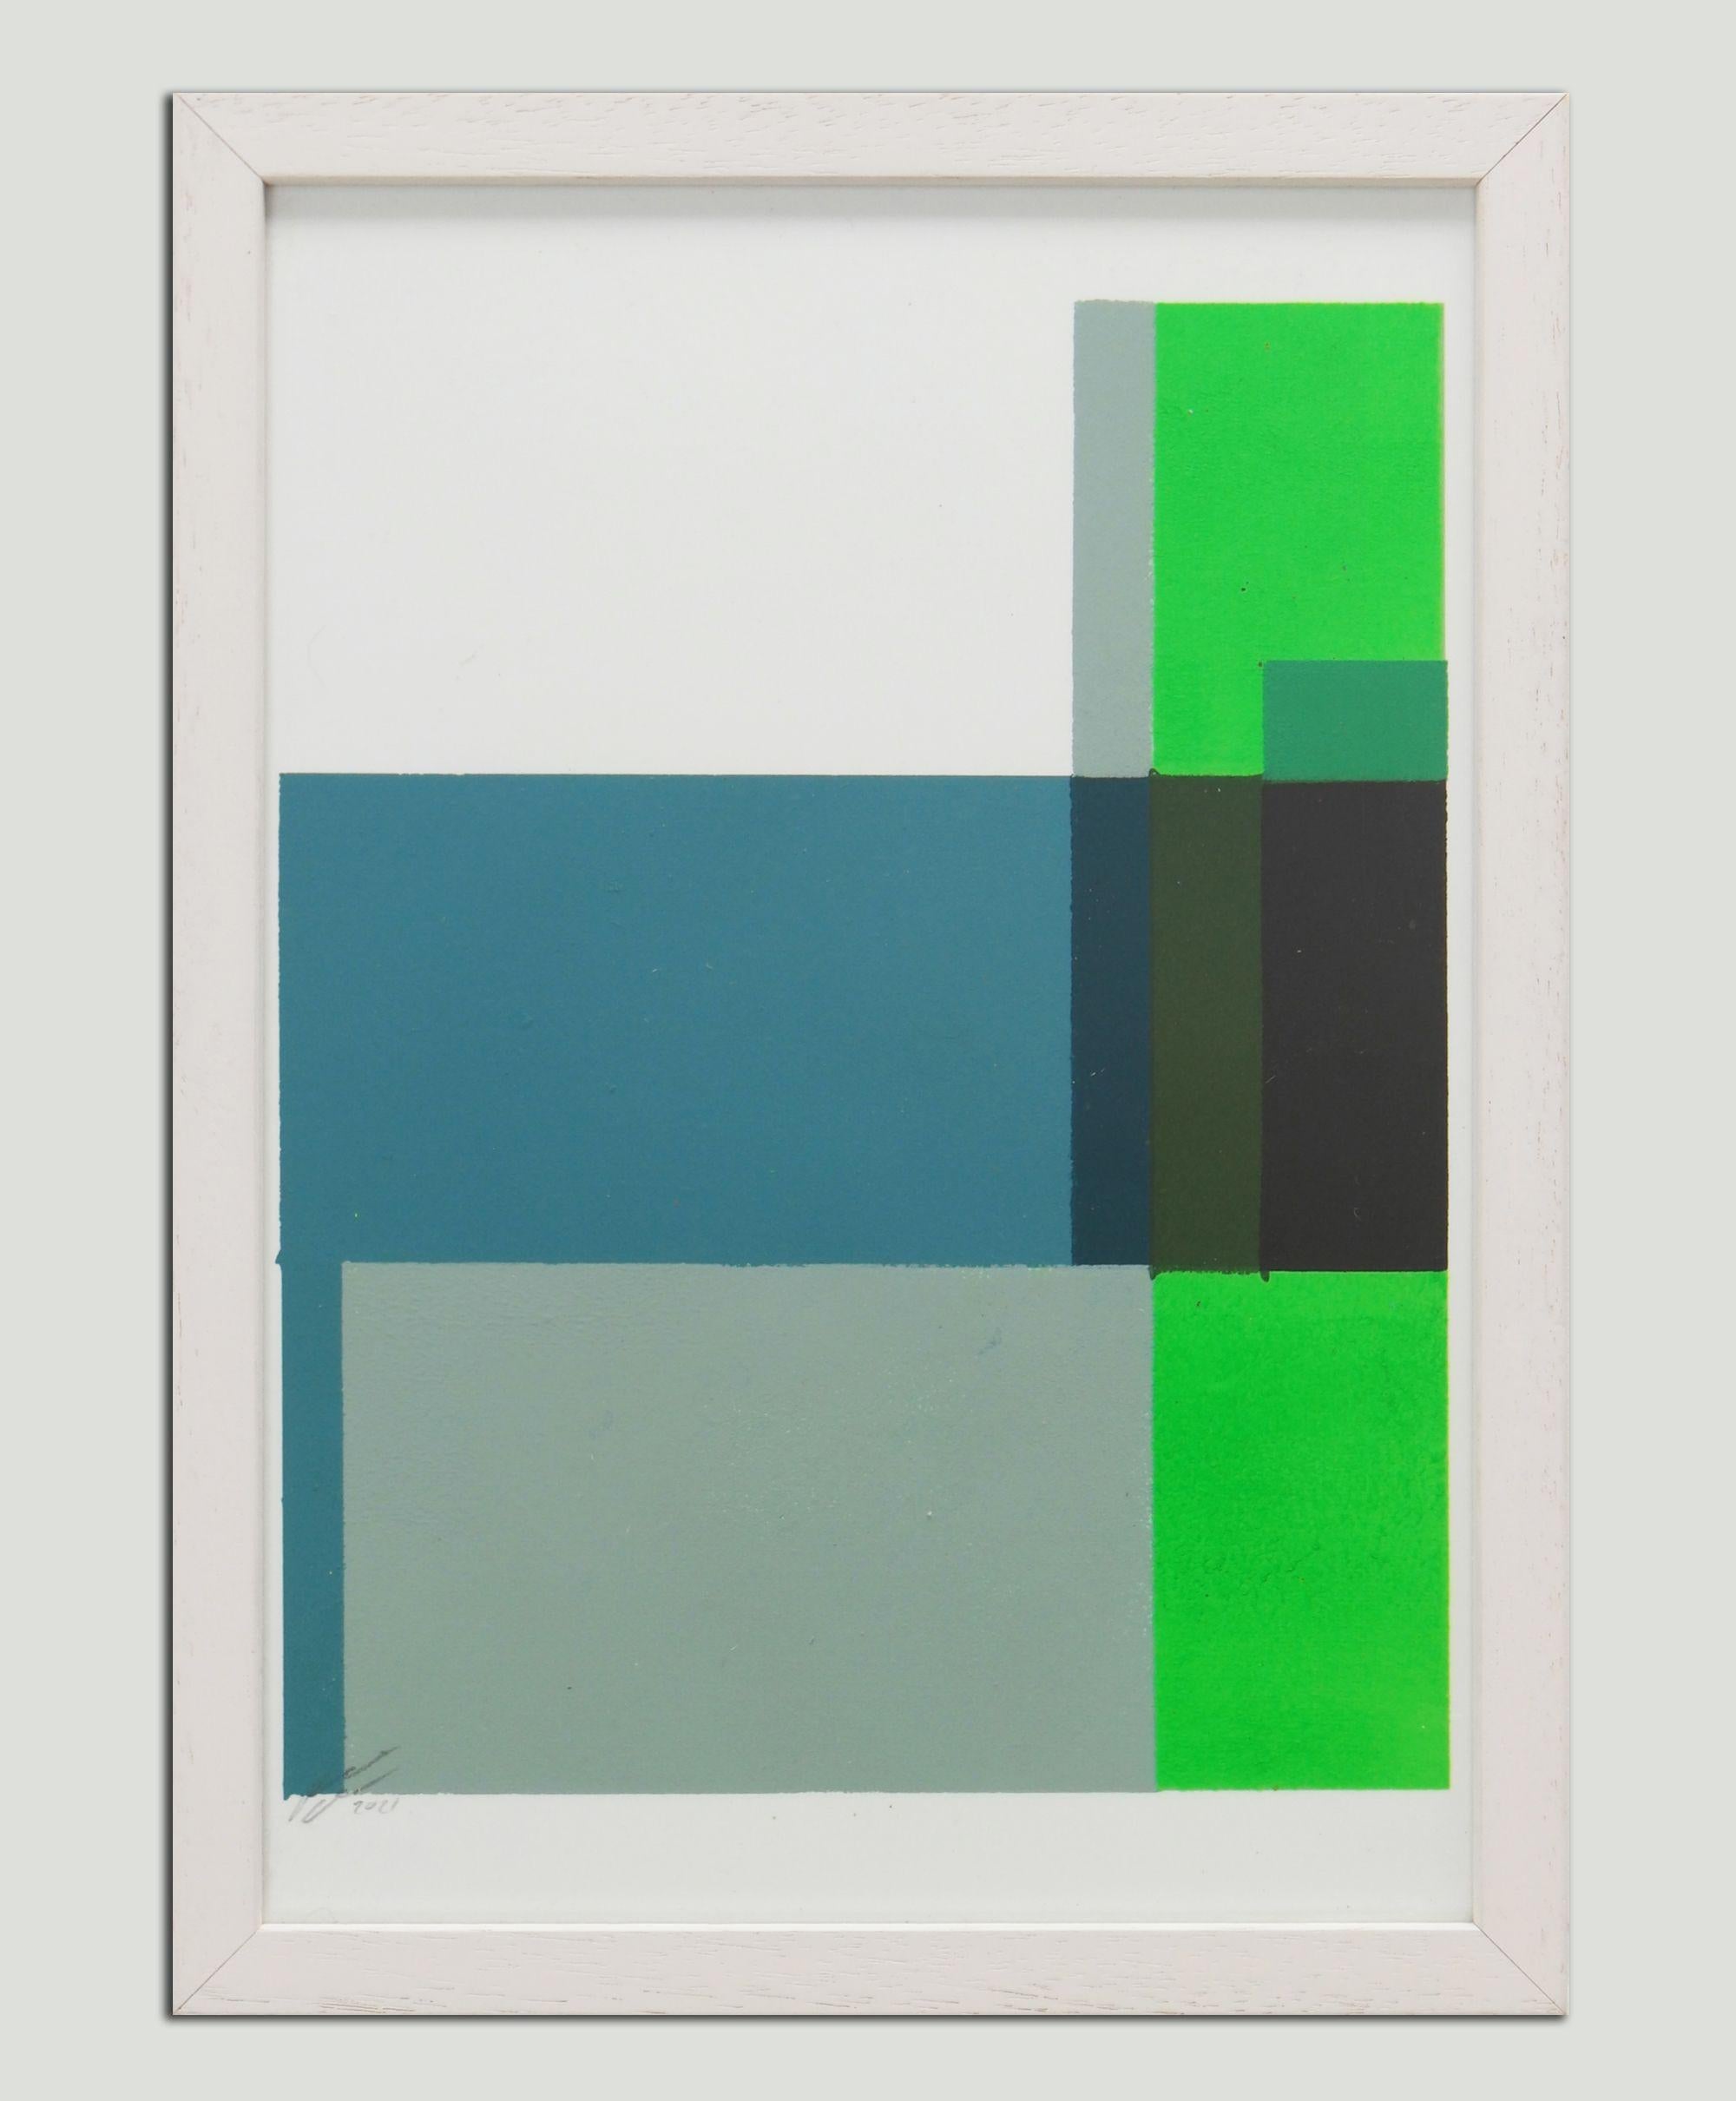 Cubistic Modern Green - Diptych - Incl Frame, Painting, Acrylic on Paper 1